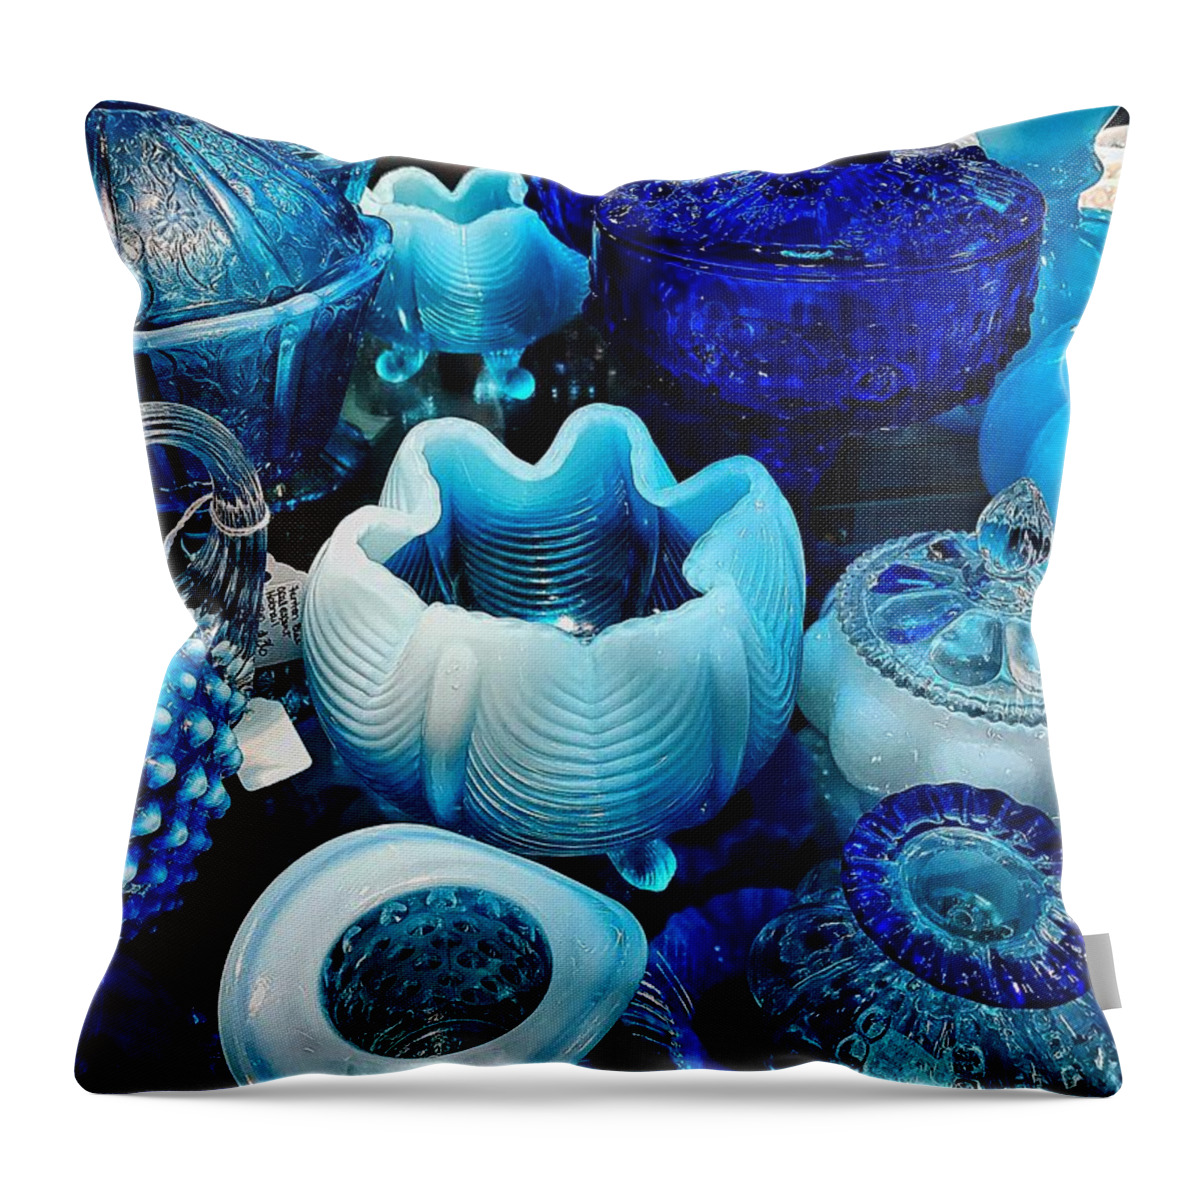  Throw Pillow featuring the photograph Blue by Stephen Dorton